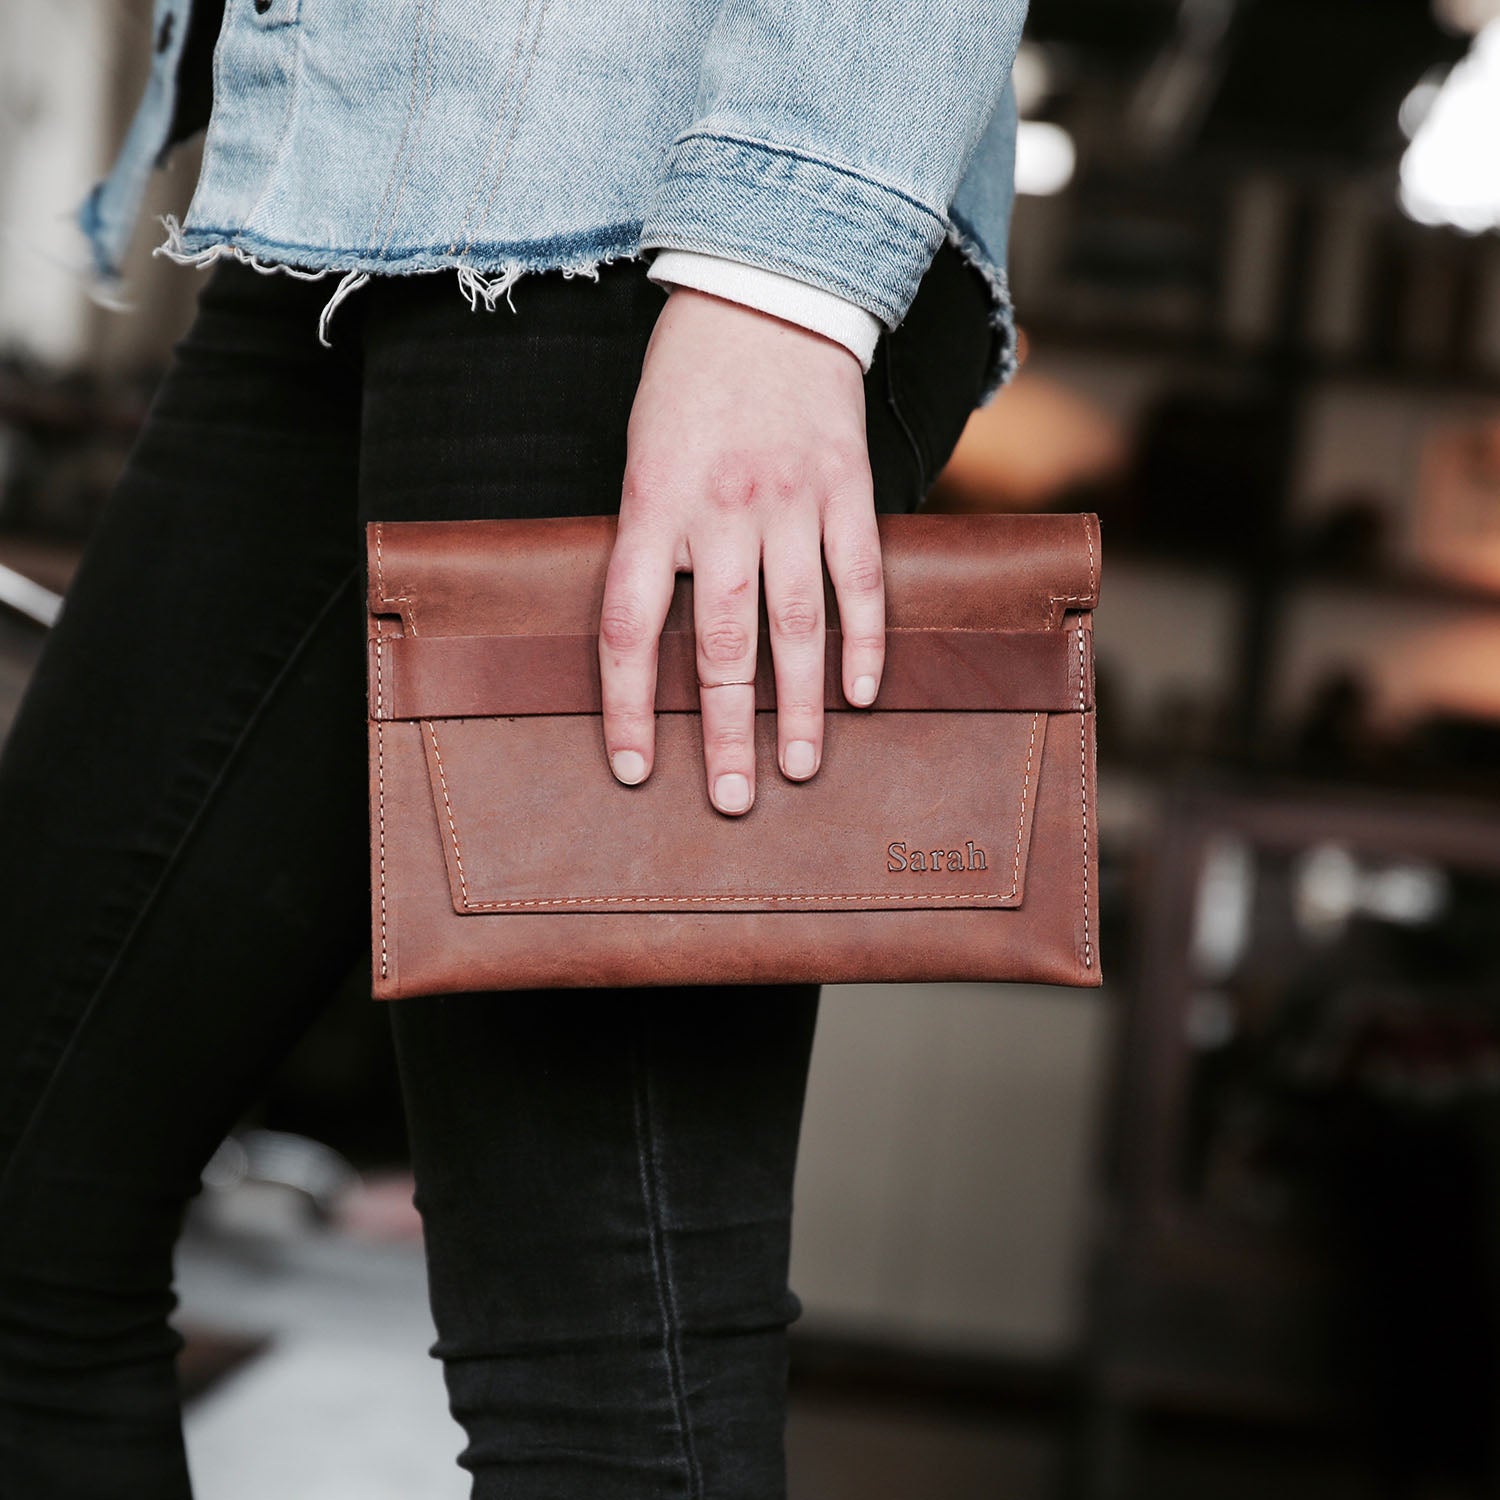 Women's Leather (Genuine) Clutches & Pouches